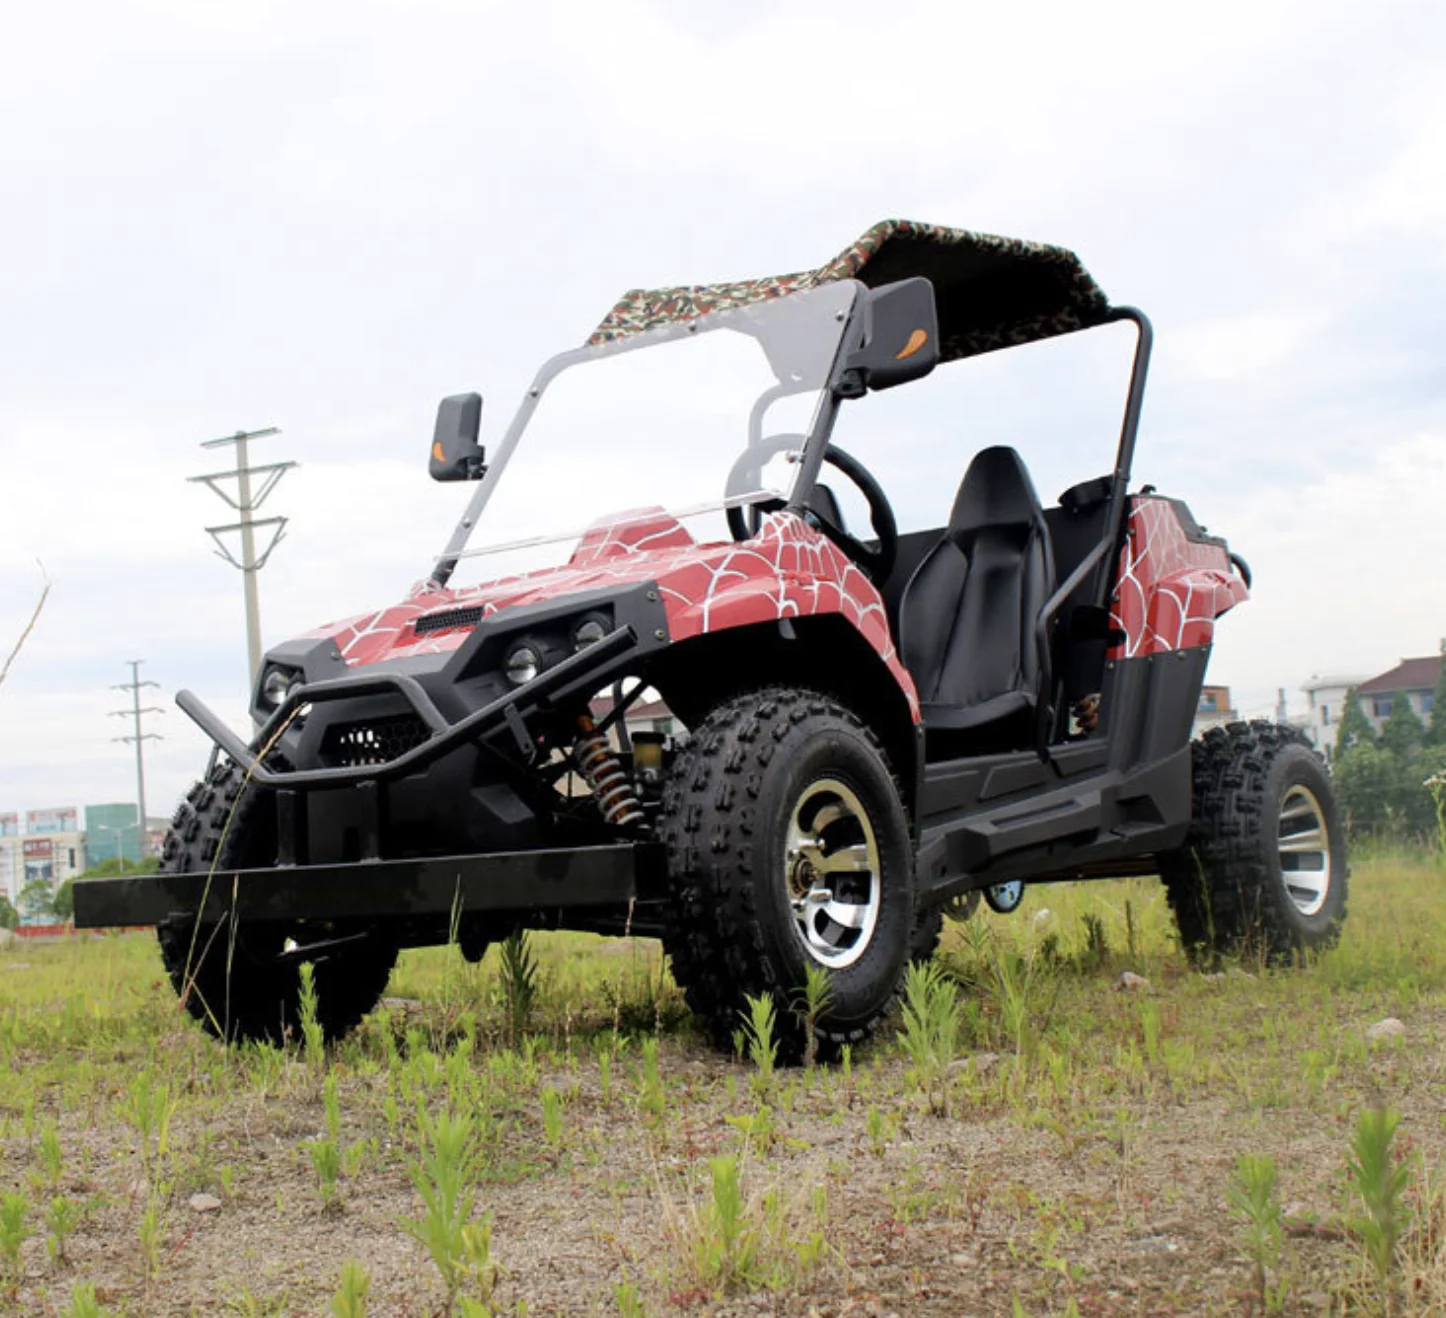 Sun automatic off road 200cc cheap racing gas go kart cross buggy for adults offroad